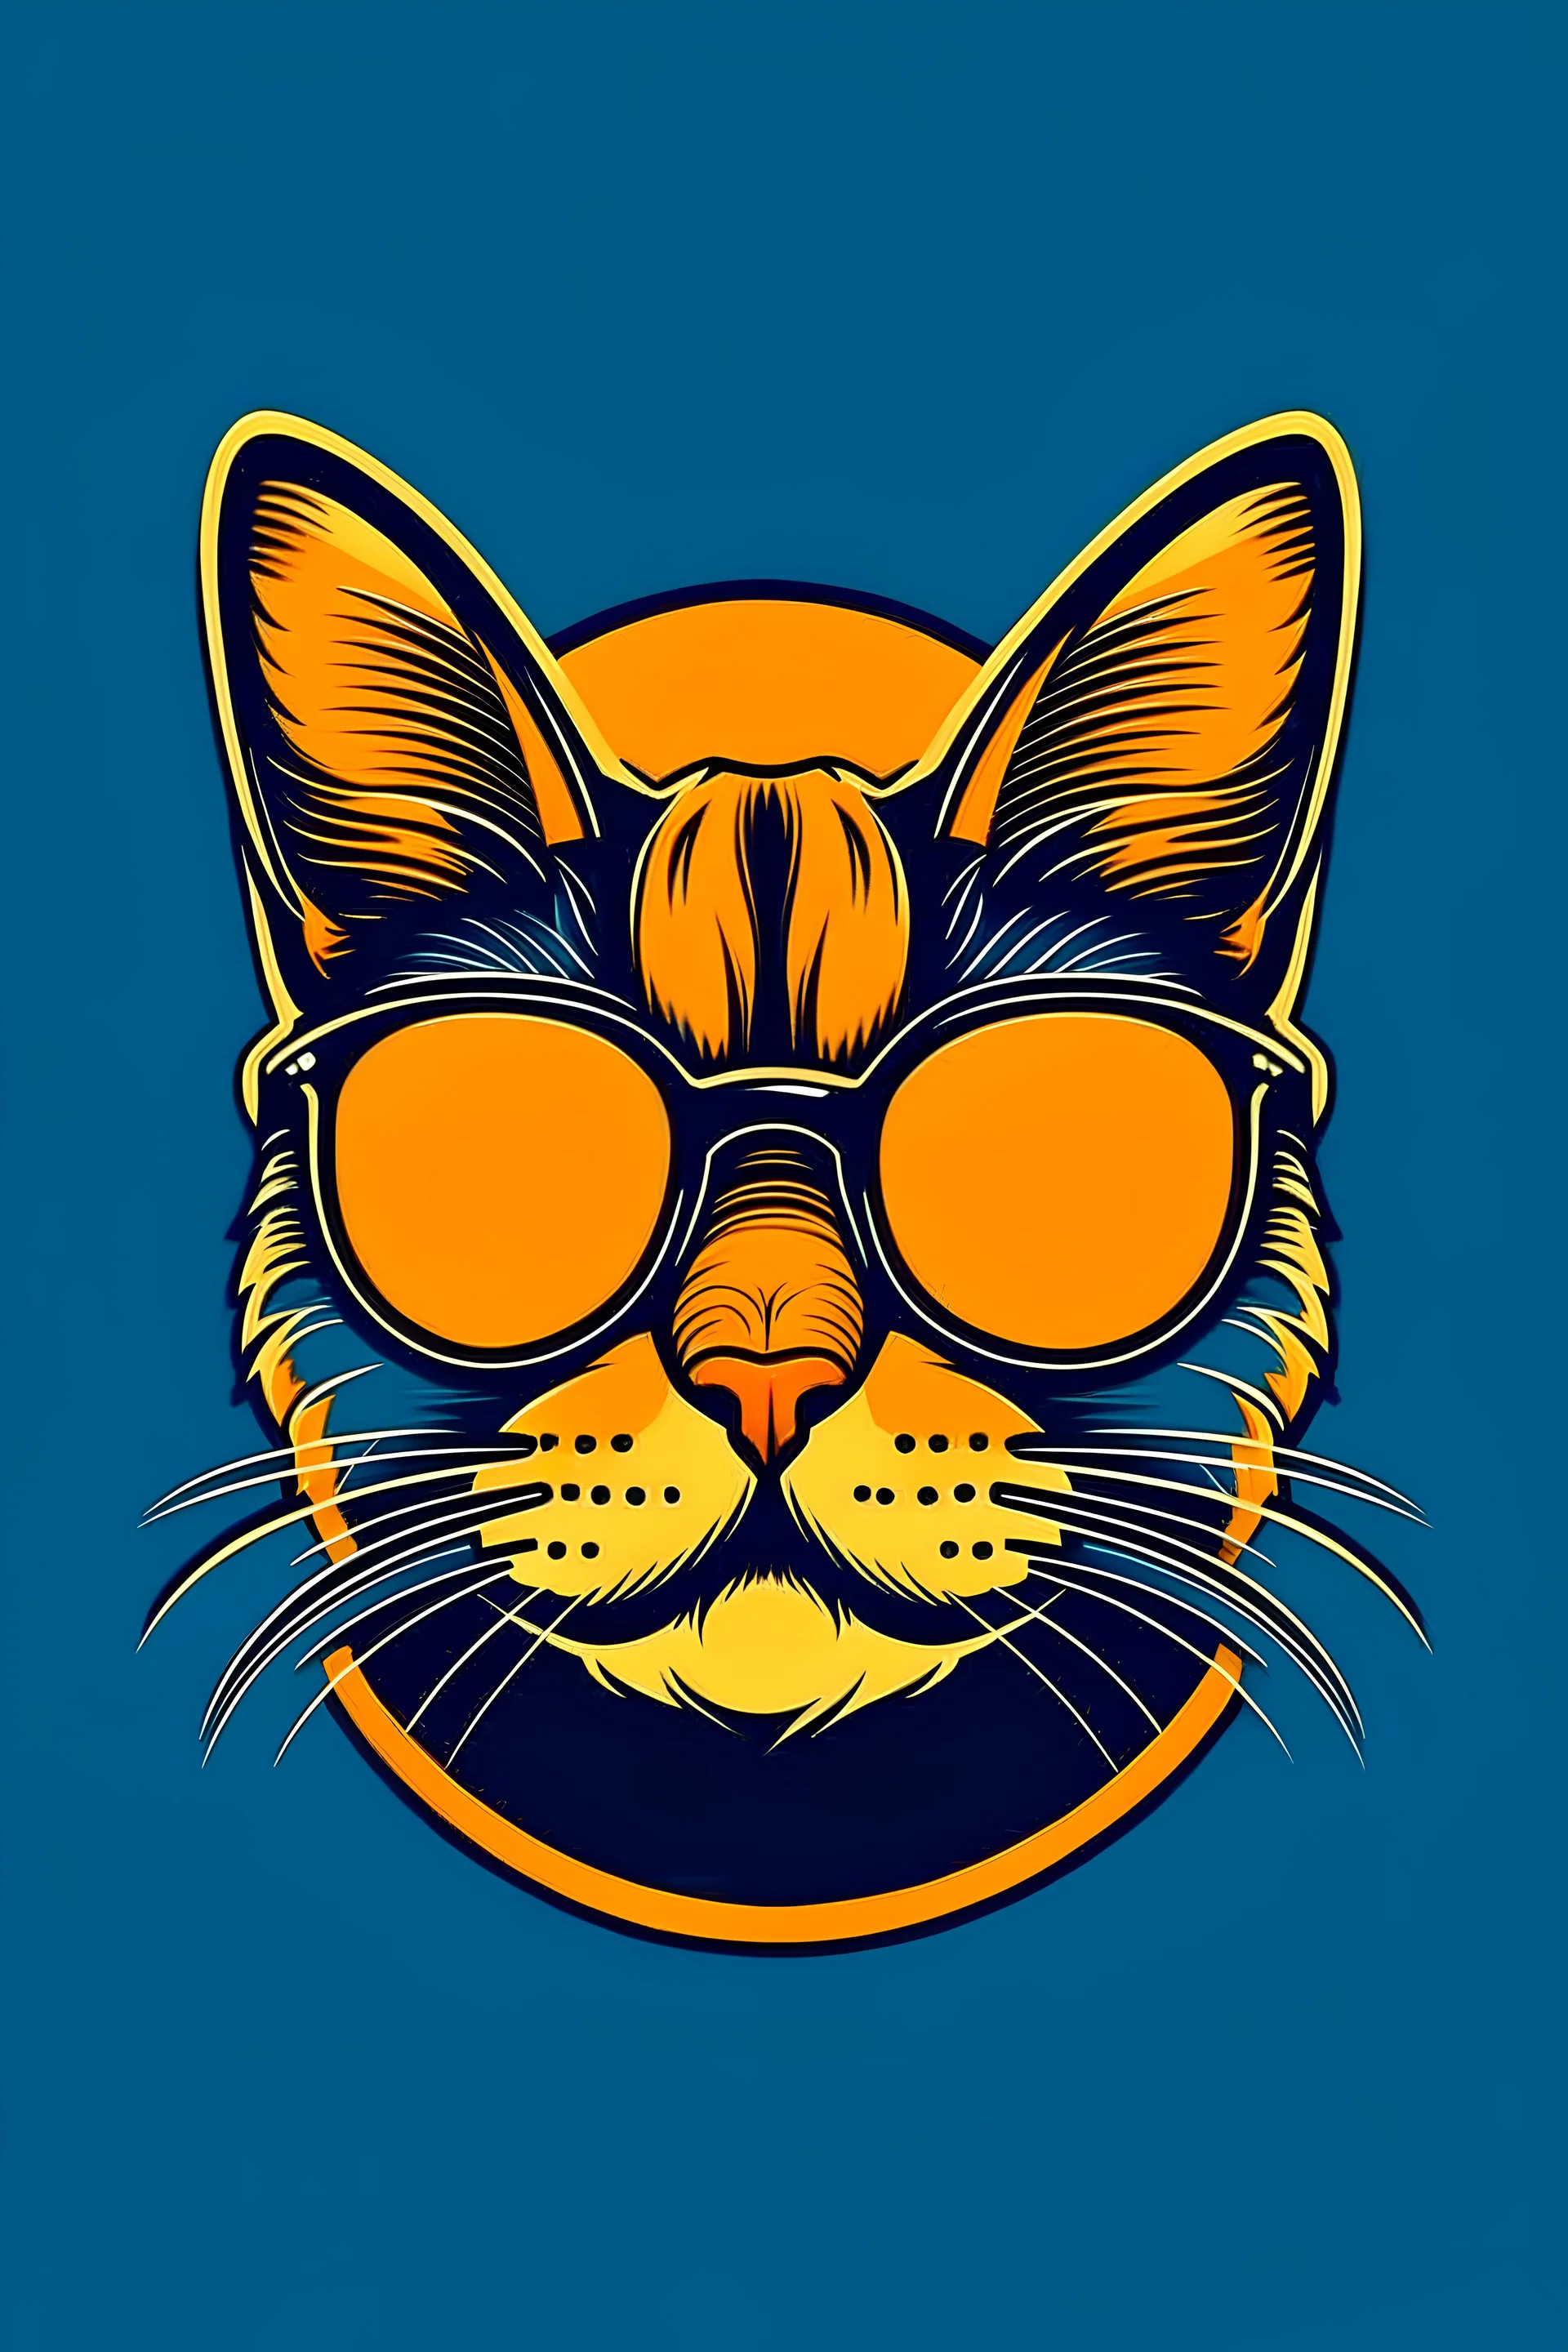 make a logo with a cool Cat with Sun glasses on it